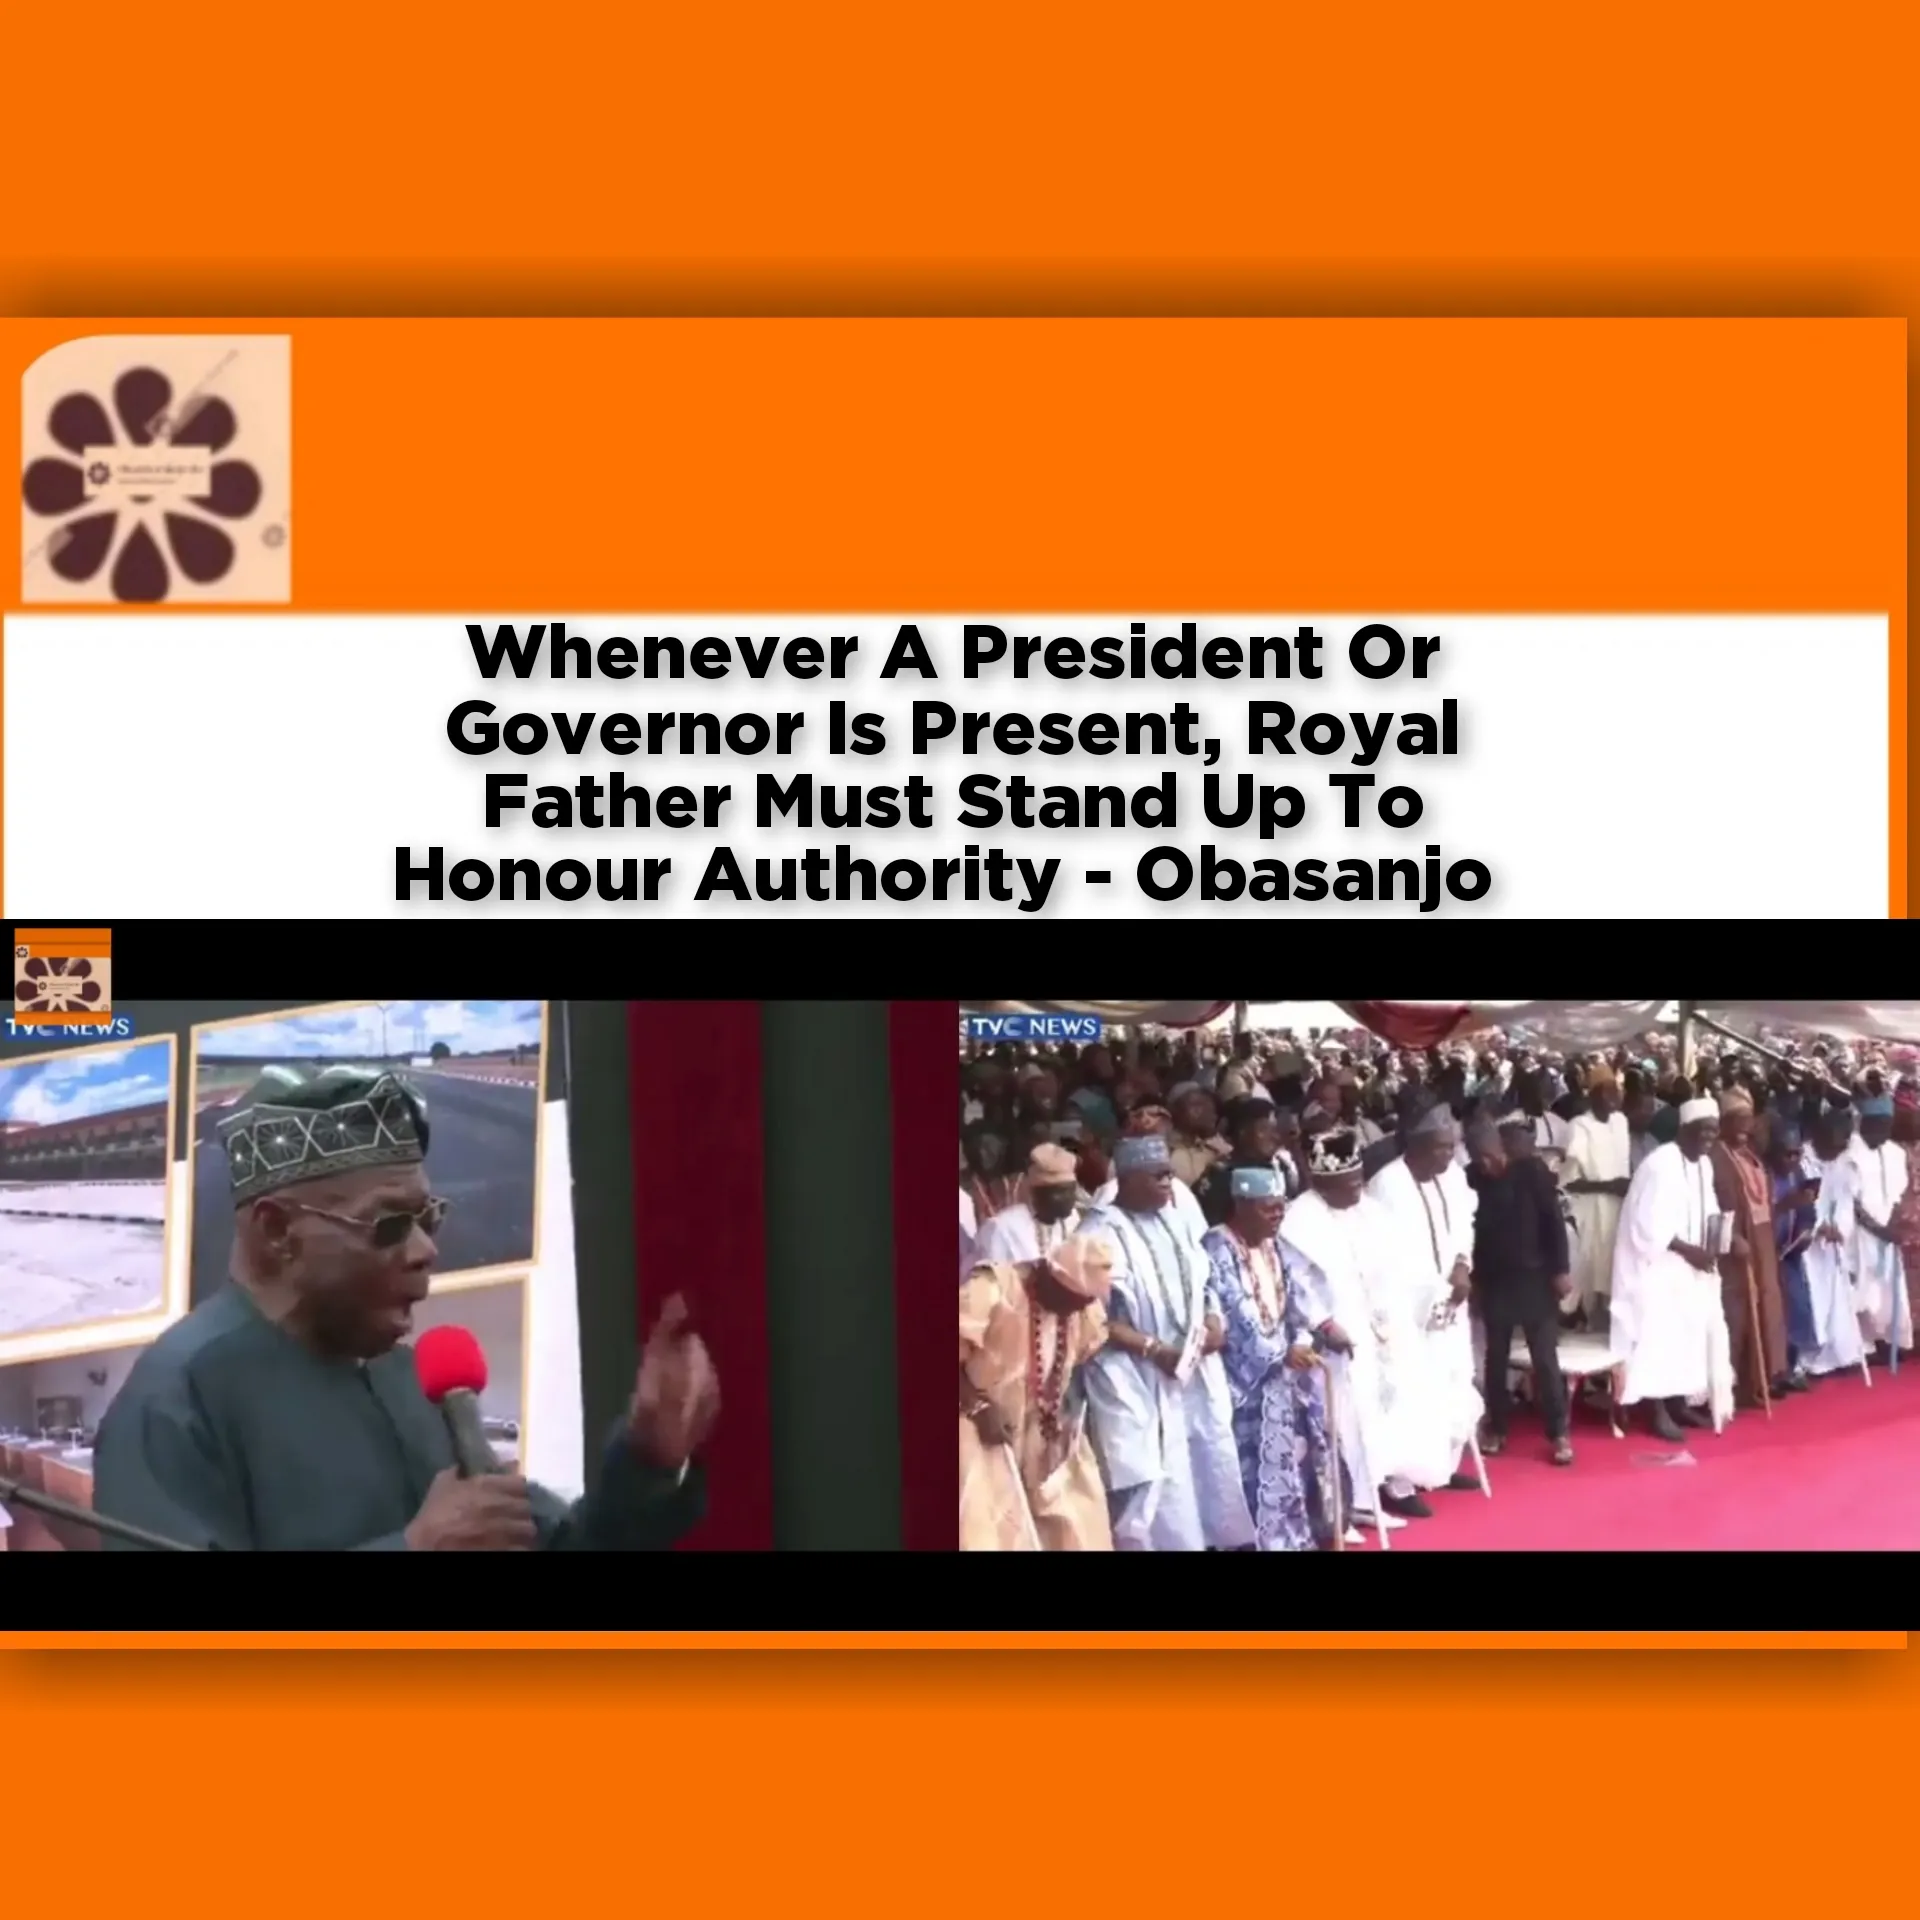 Whenever A President Or Governor Is Present, Royal Father Must Stand Up To Honour Authority – Obasanjo